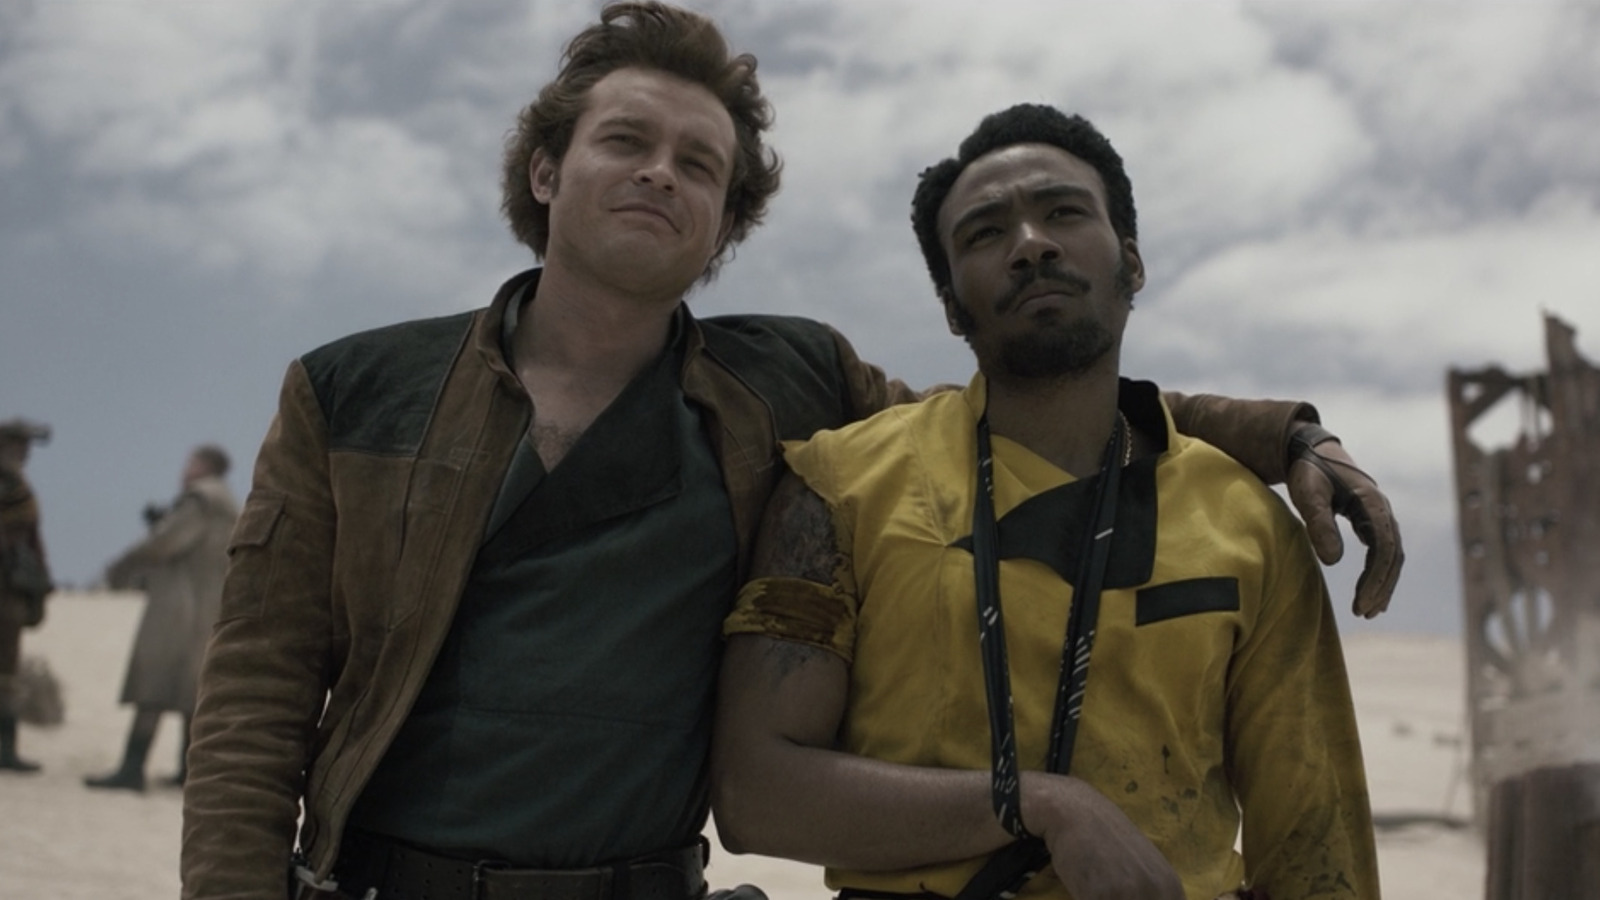 #Kathleen Kennedy Says The Lando Disney+ Series Starring Donald Glover Is Still In The Works